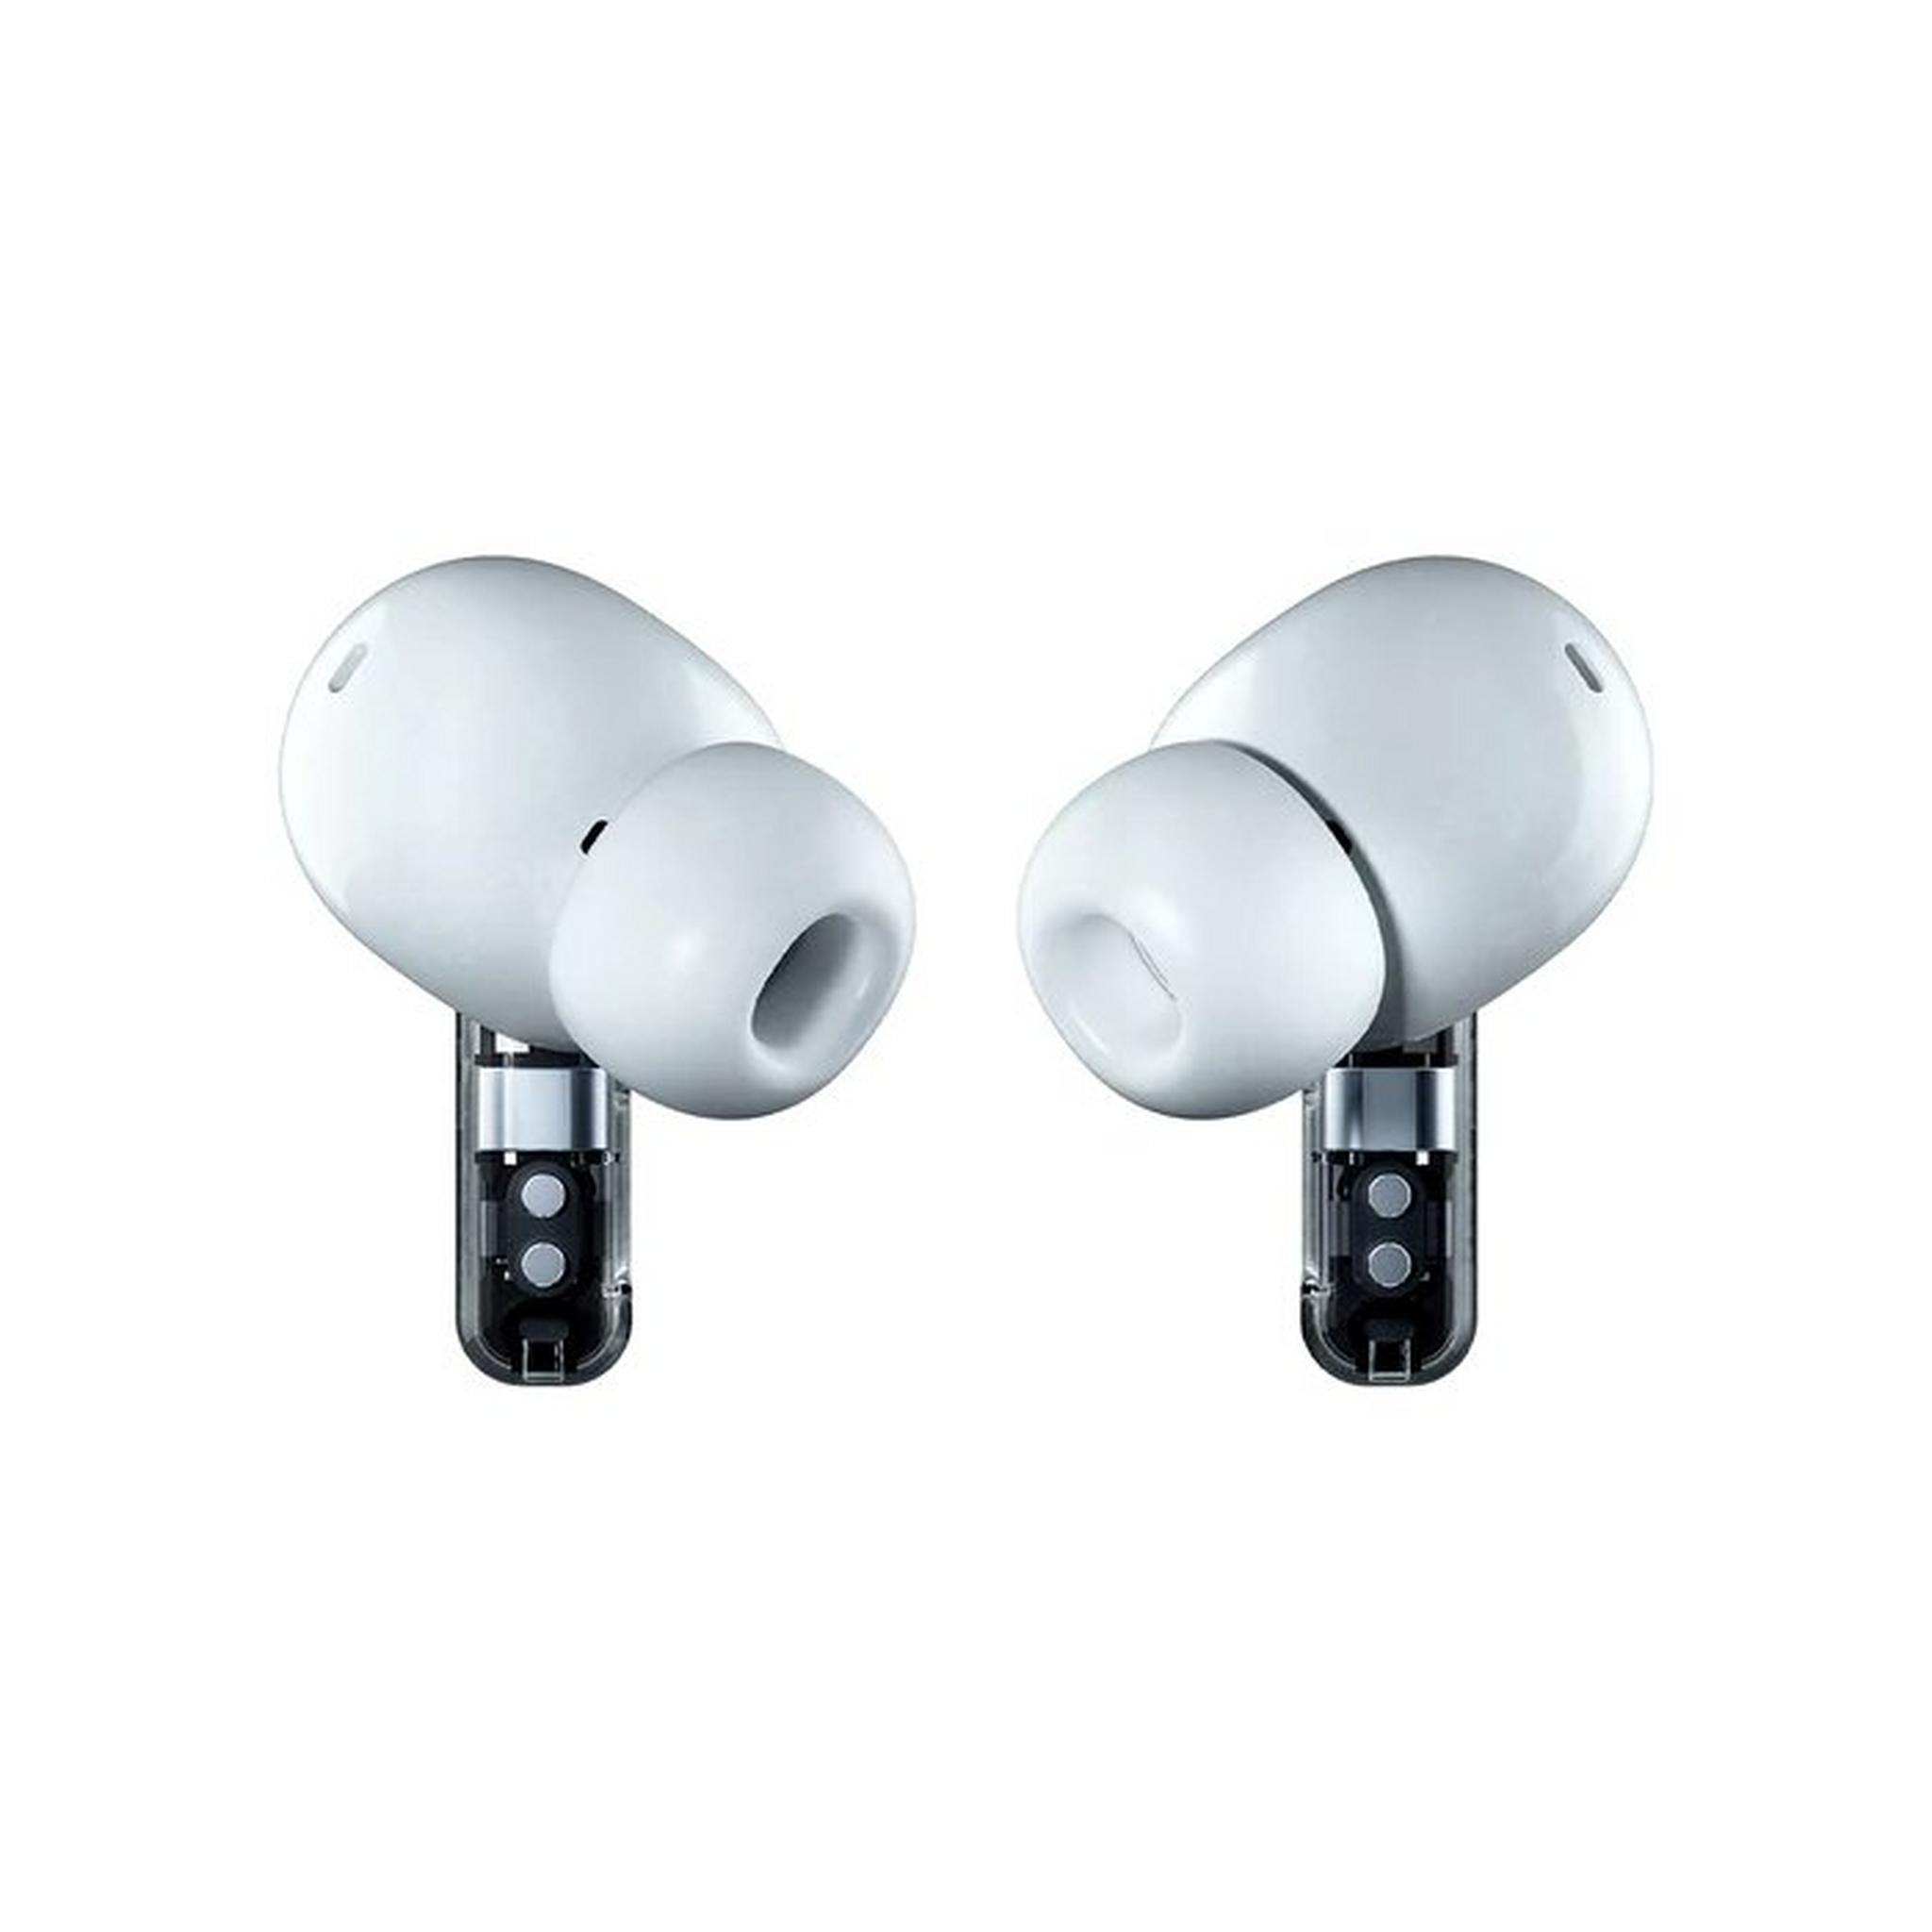 NOTHING Ear (2) Wireless Earbuds, A10600019 – White